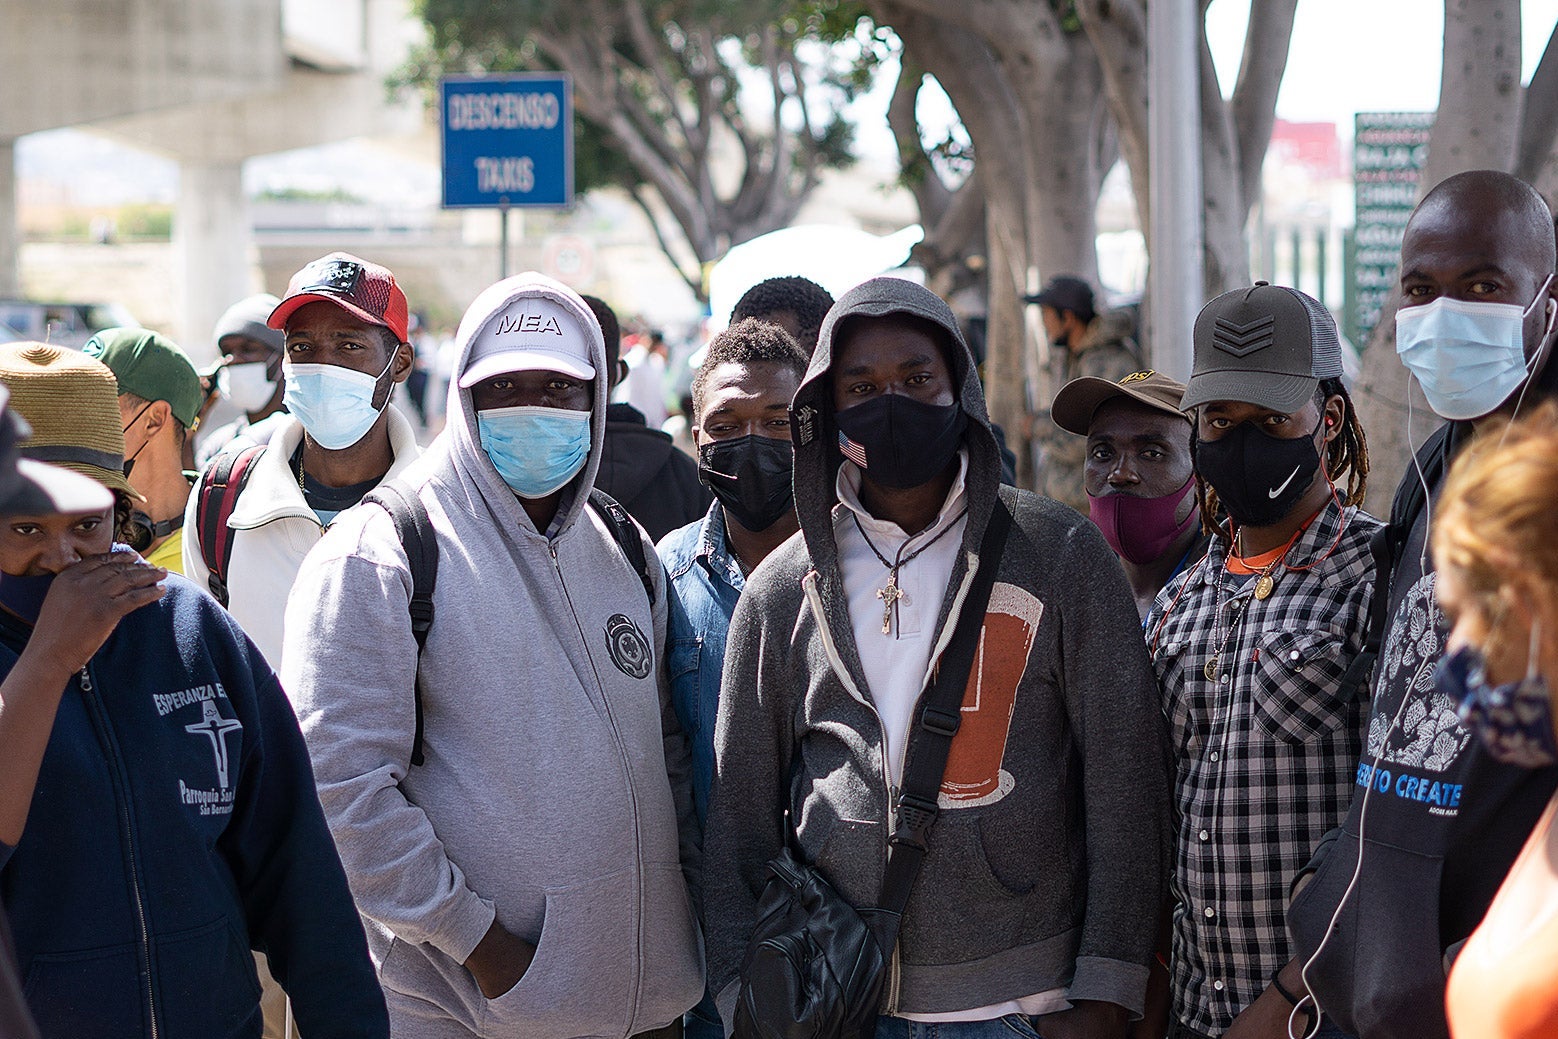 A group of men stand together wearing masks.